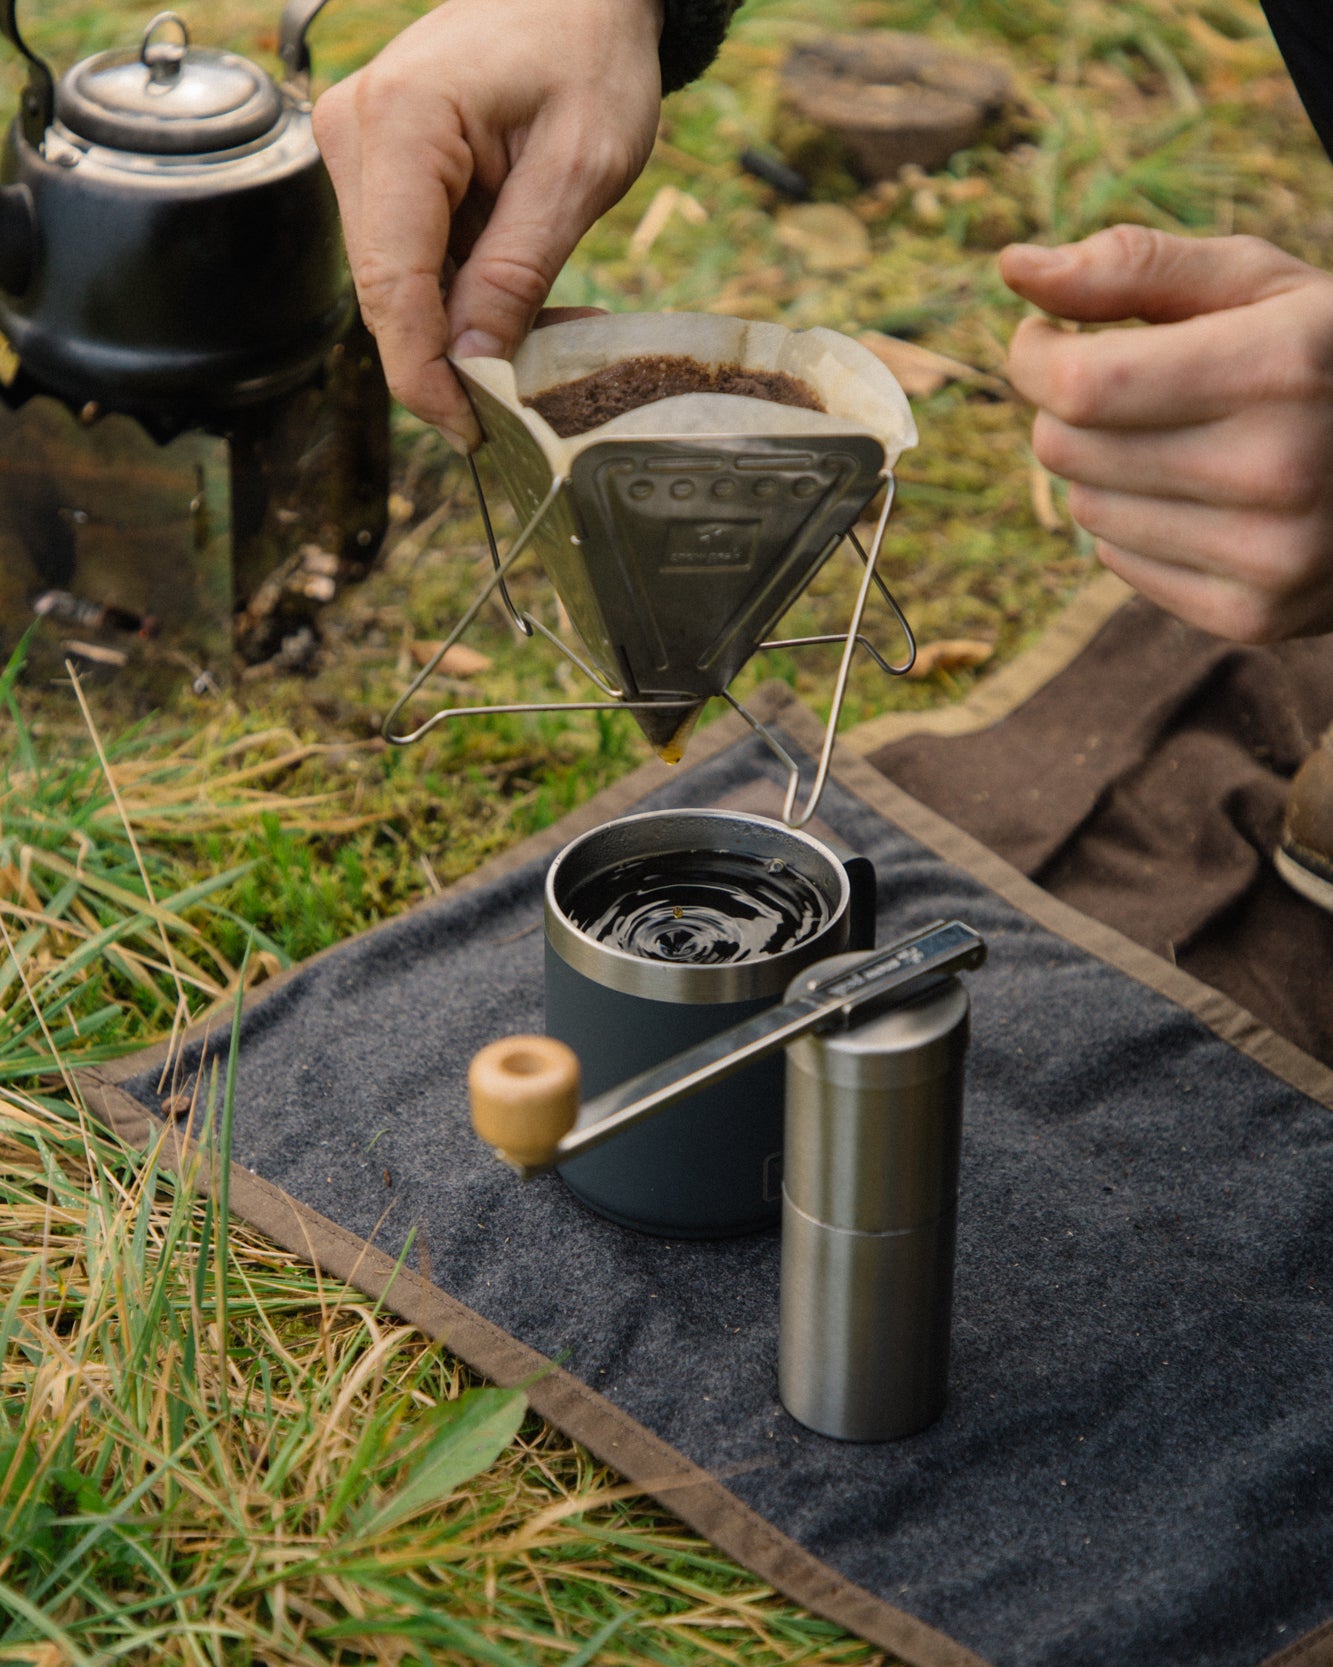 Campfire Coffee Almost Tastes Great